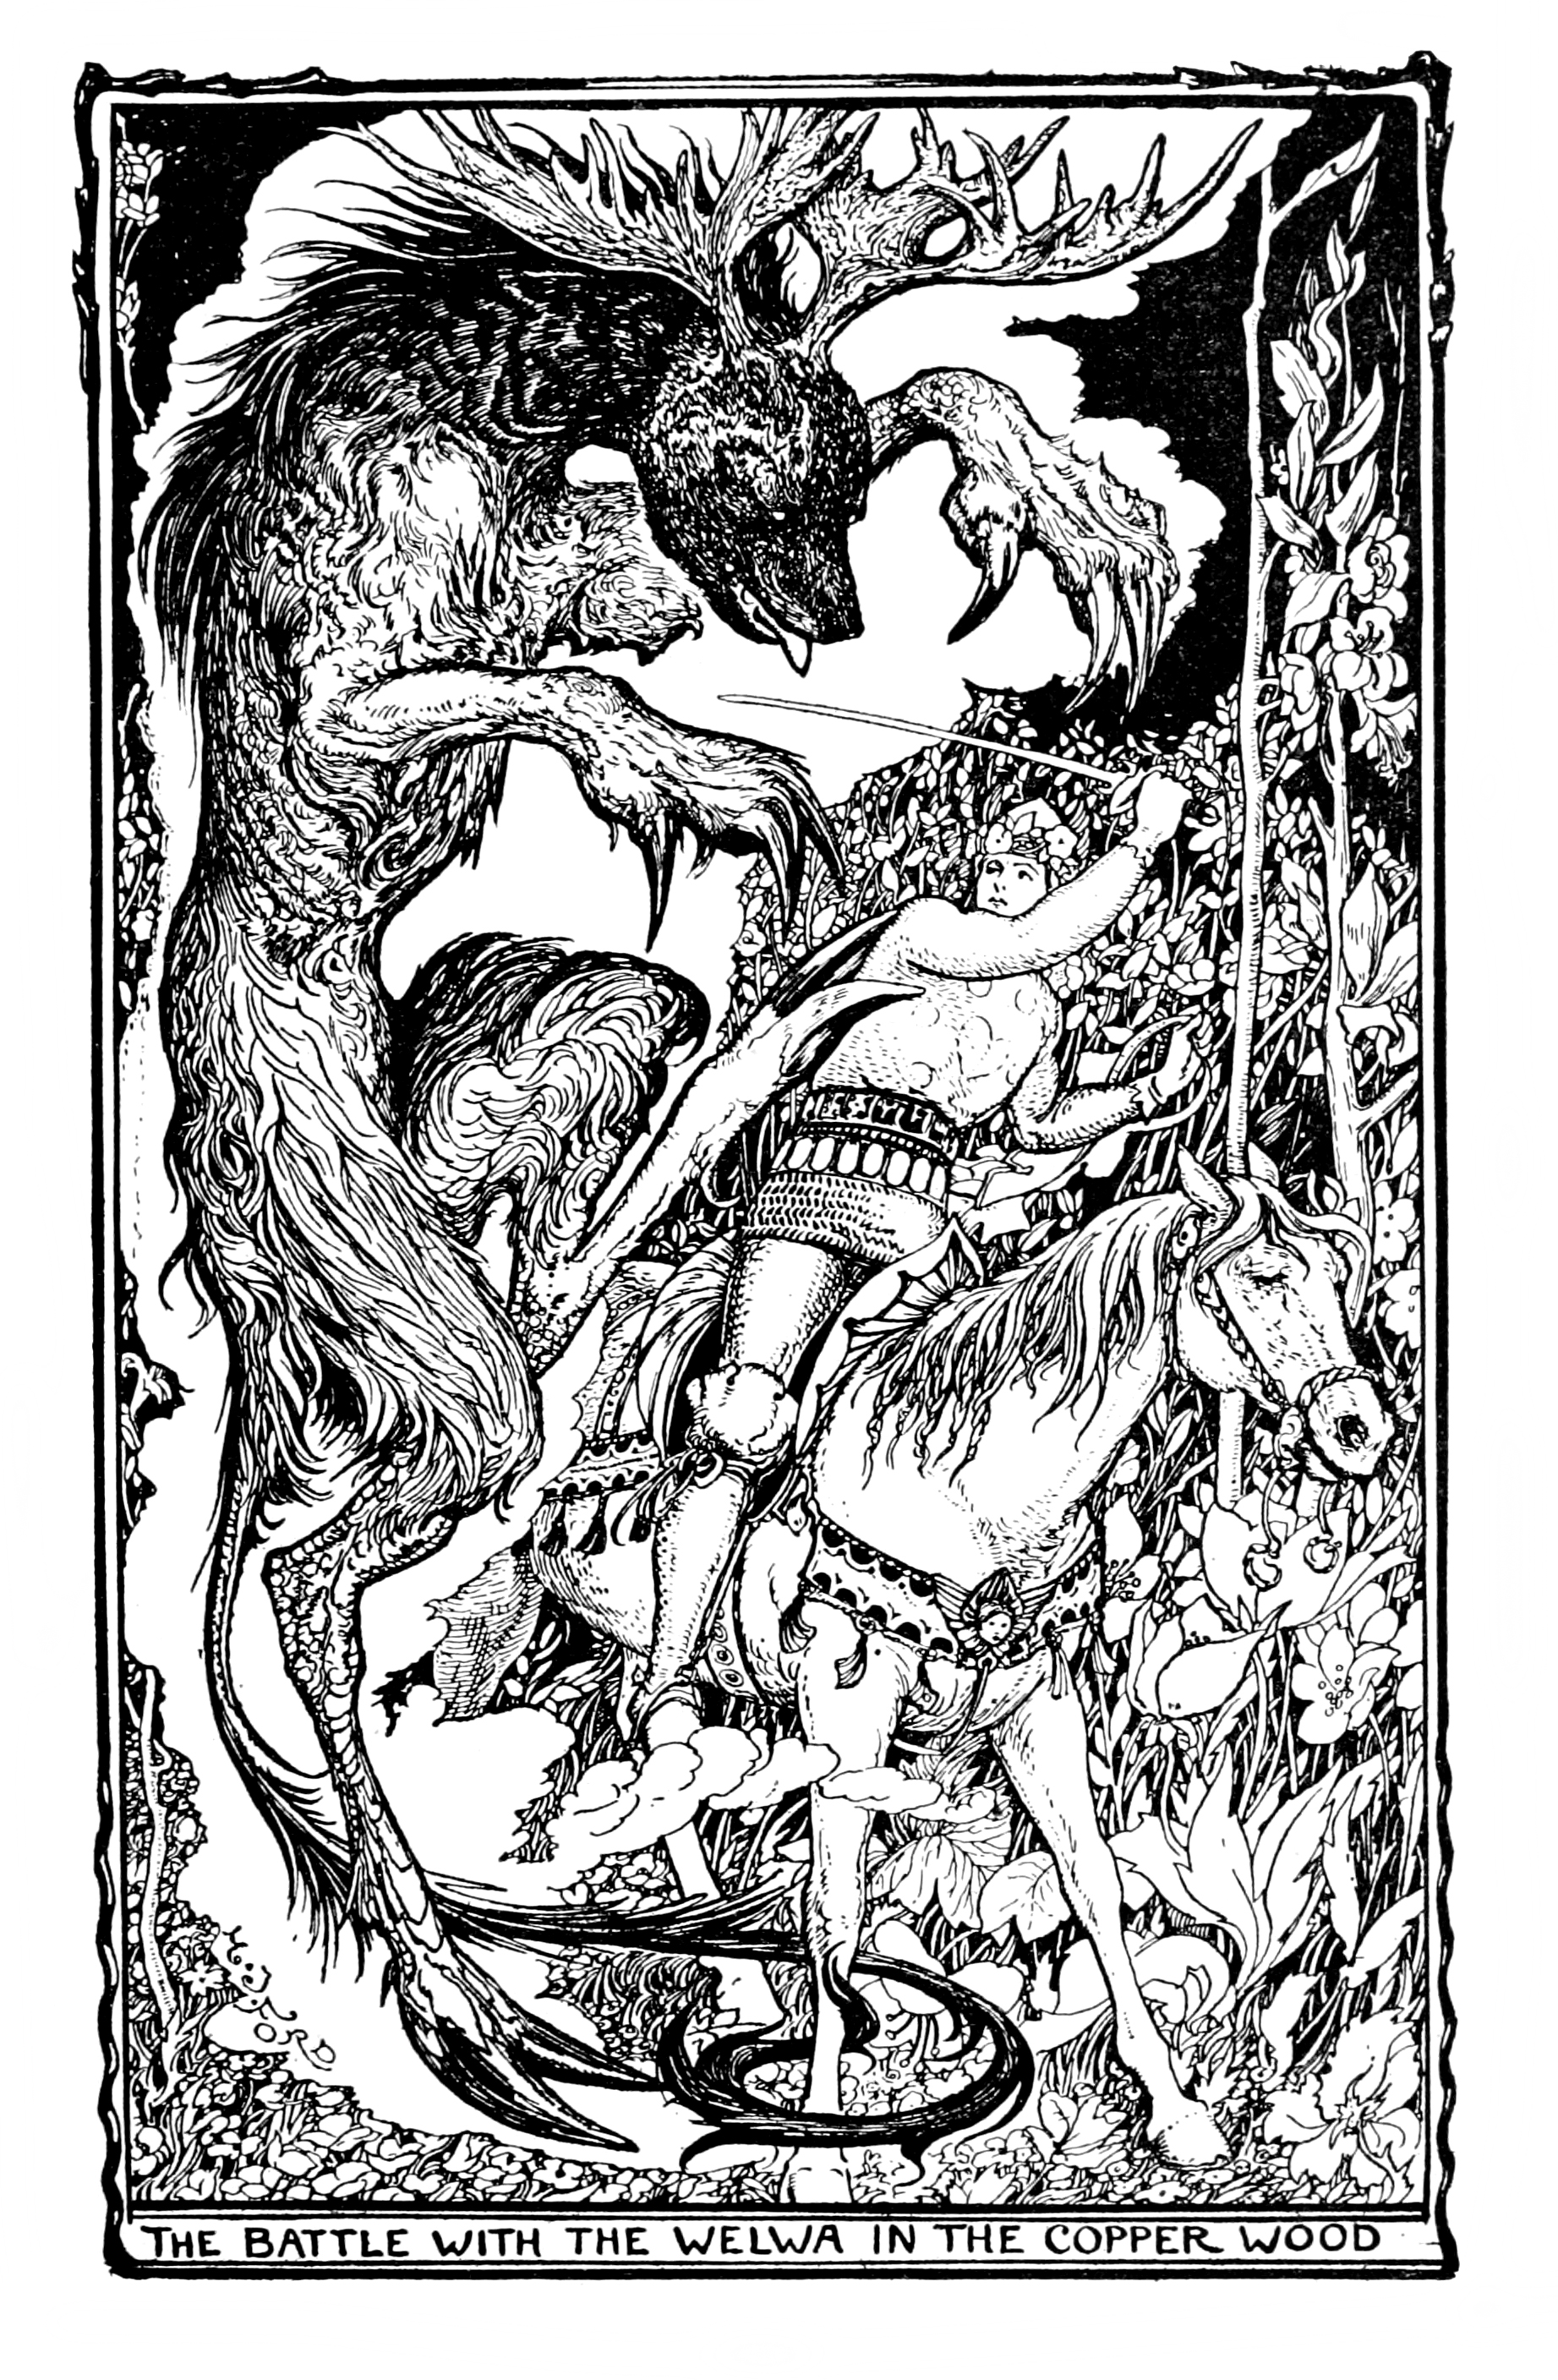 Henry Justice Ford - The violet fairy book, edited by Andrew Lang, 1906 (illustration 10)